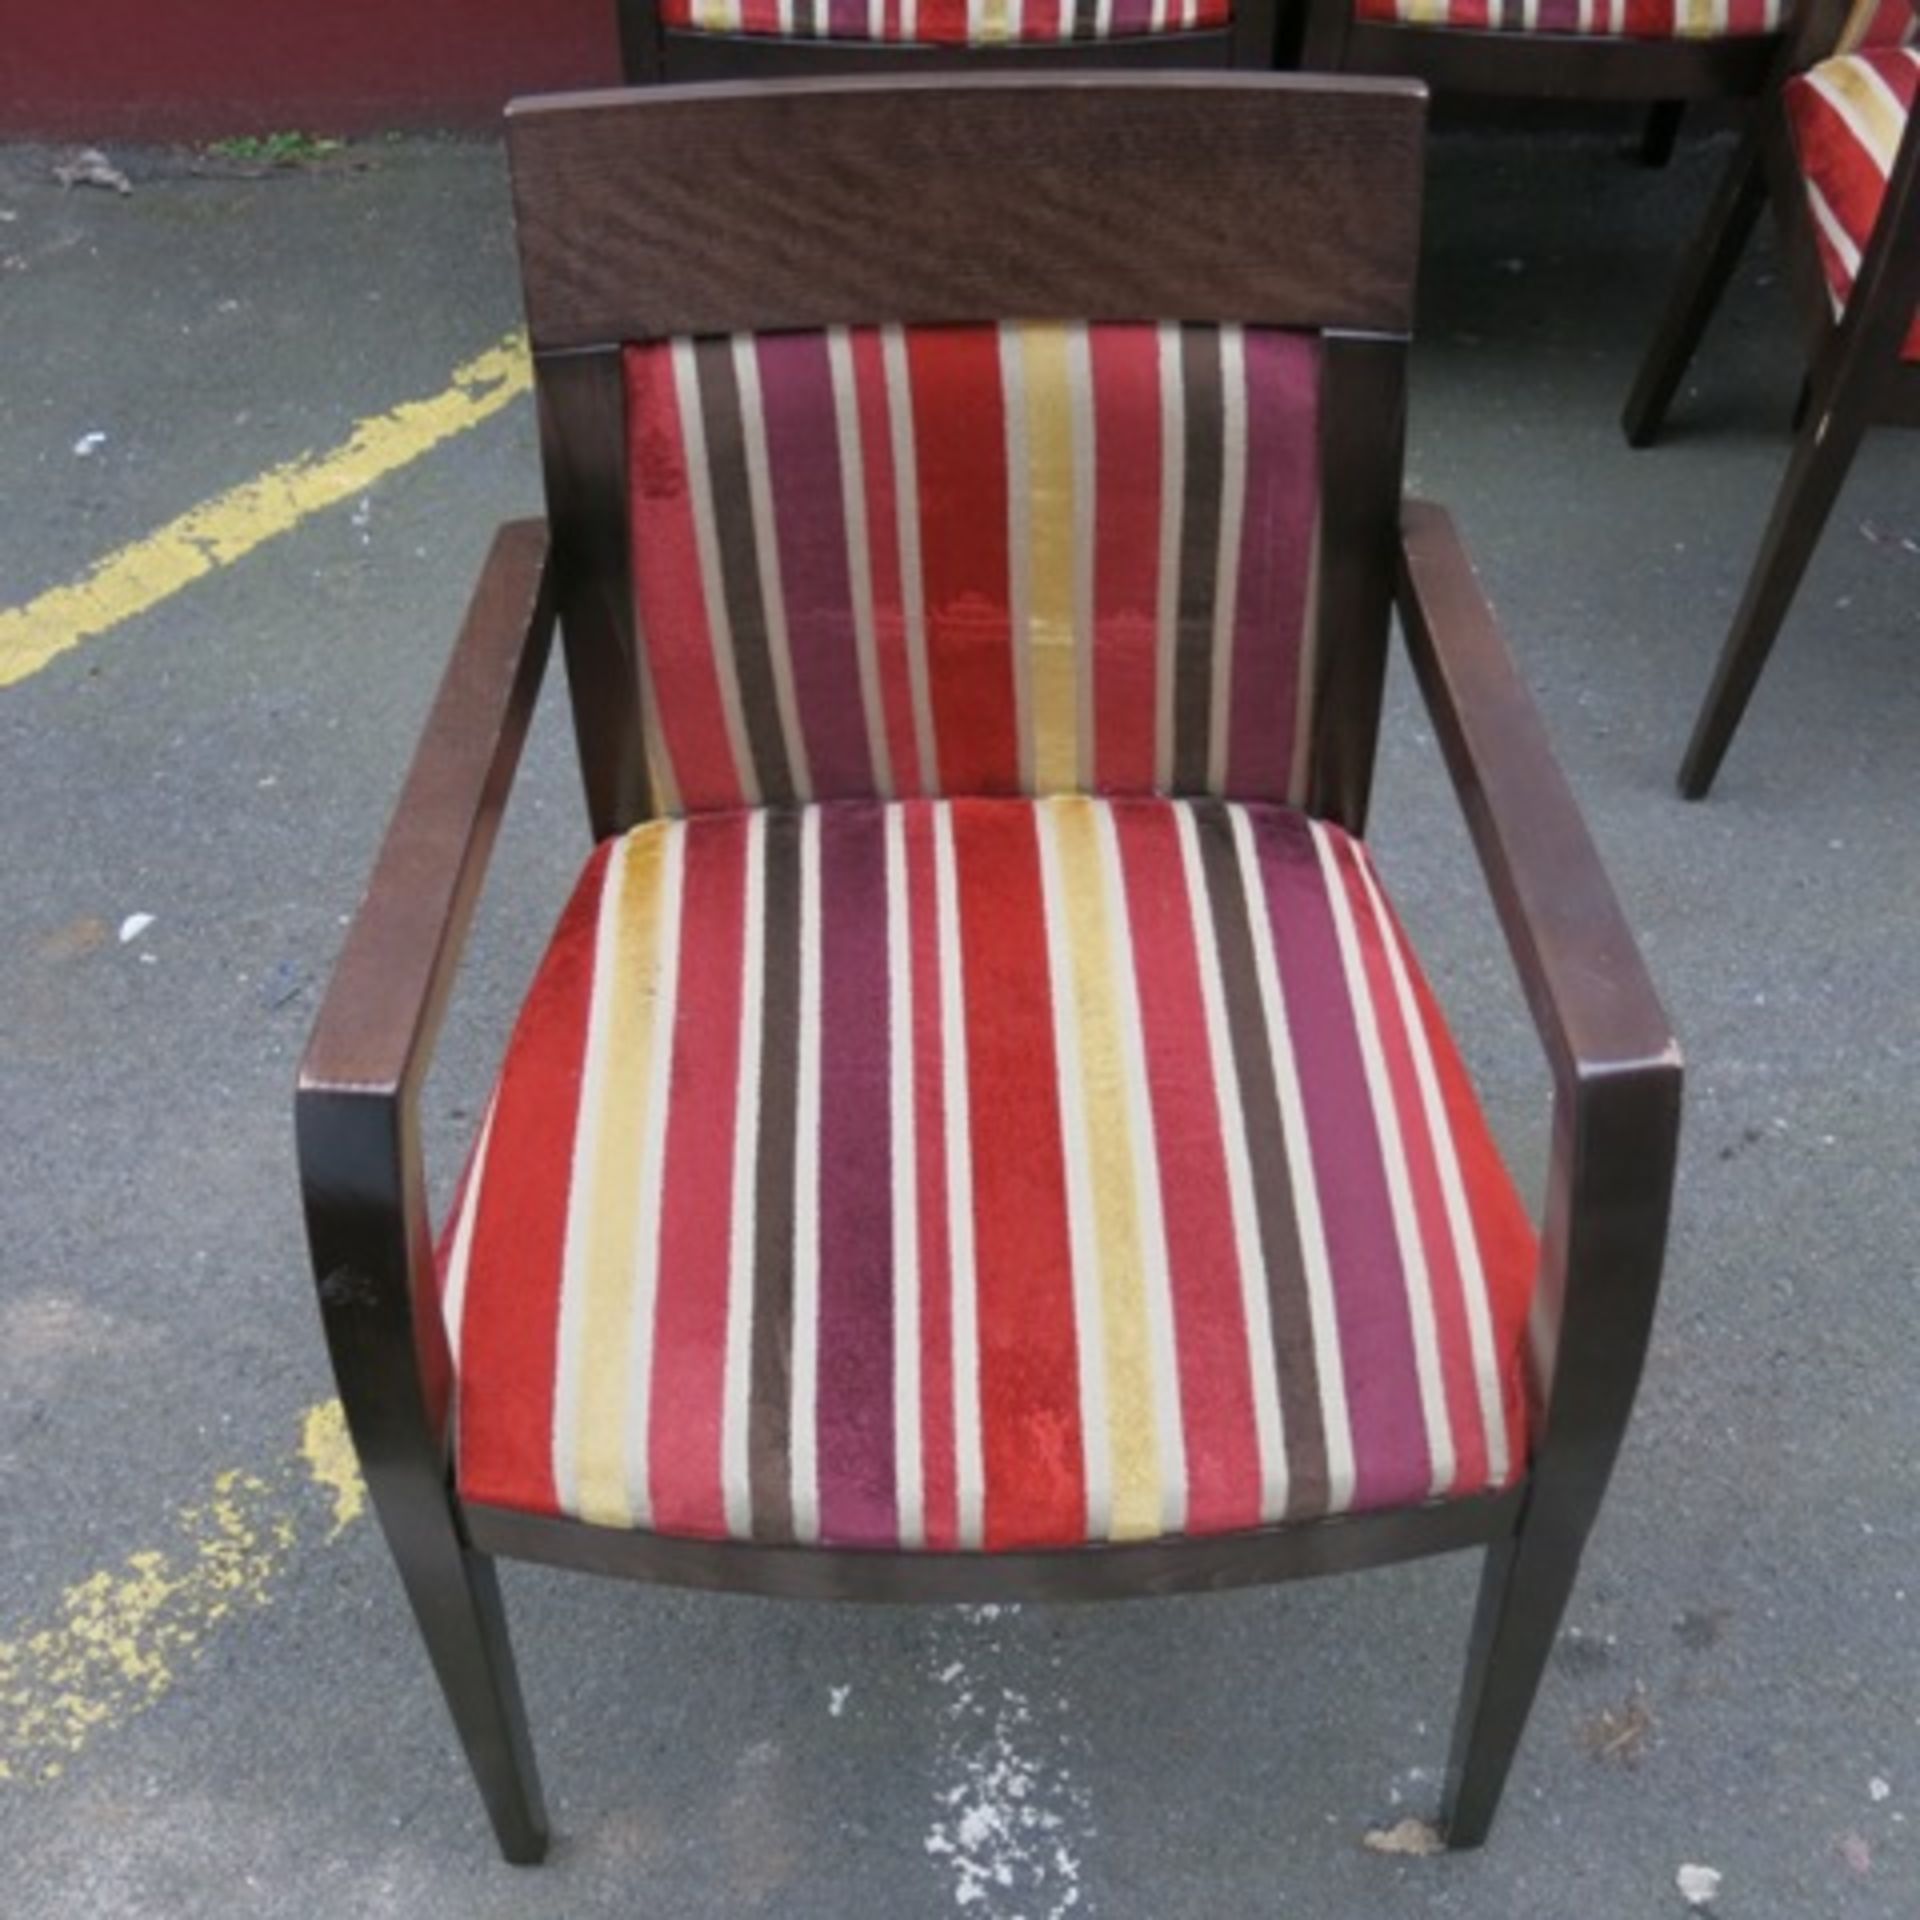 5 x Stained Darkwood Dining Chairs, Upholstered in Red/Gold/Brown Fabric - Image 4 of 5